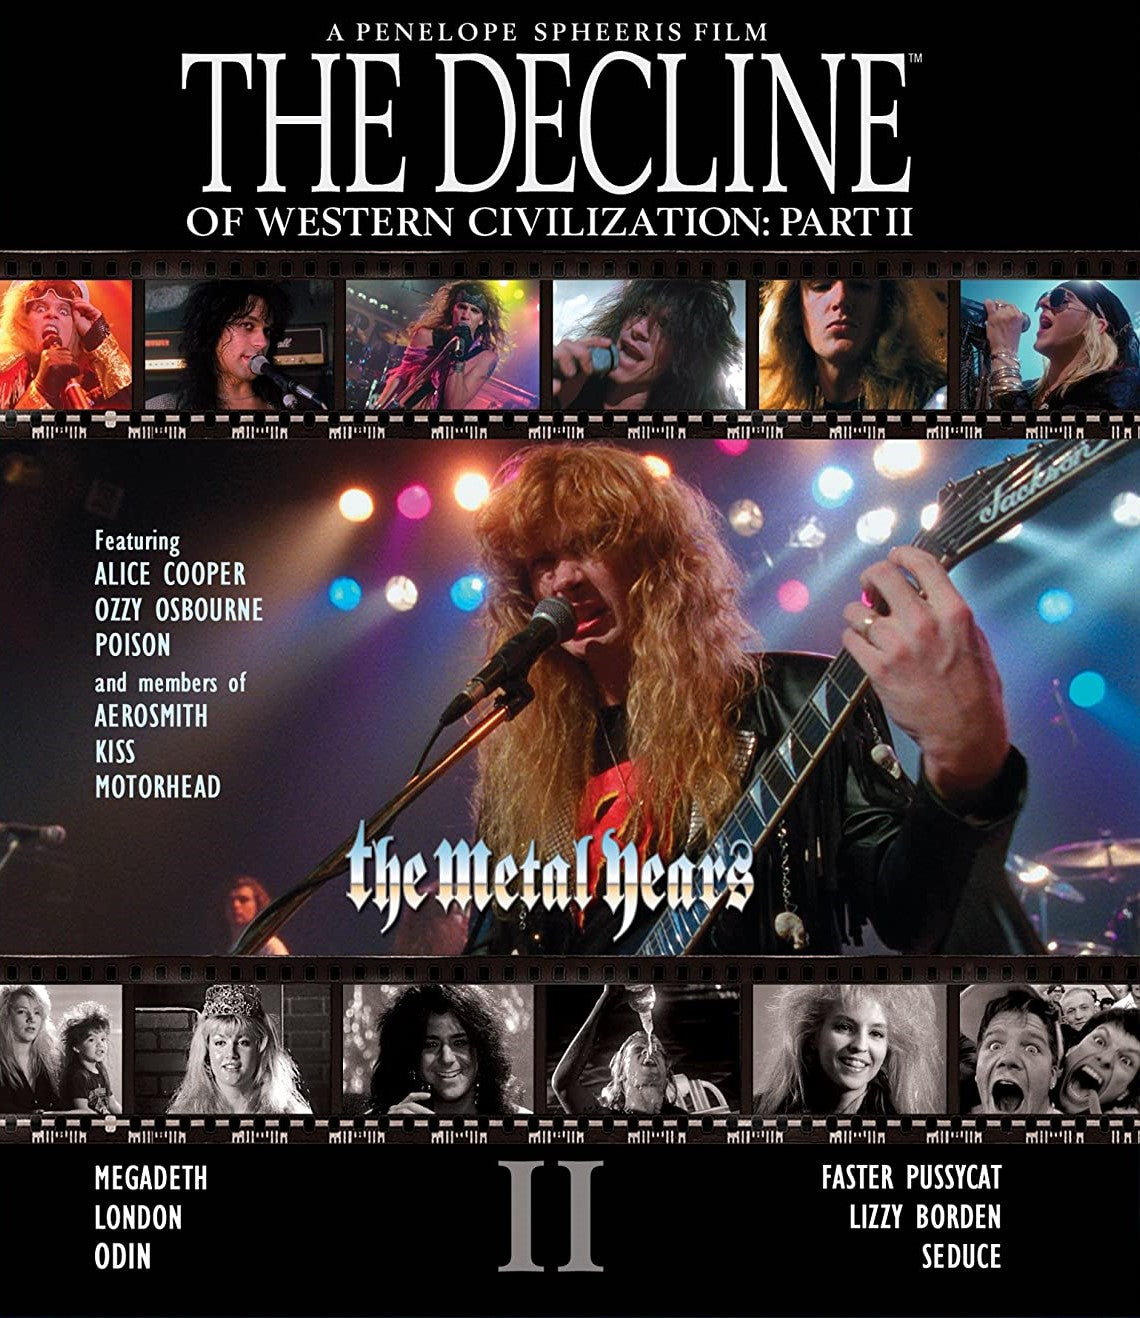 THE DECLINE OF WESTERN CIVILIZATION PART II: THE METAL YEARS BLU-RAY